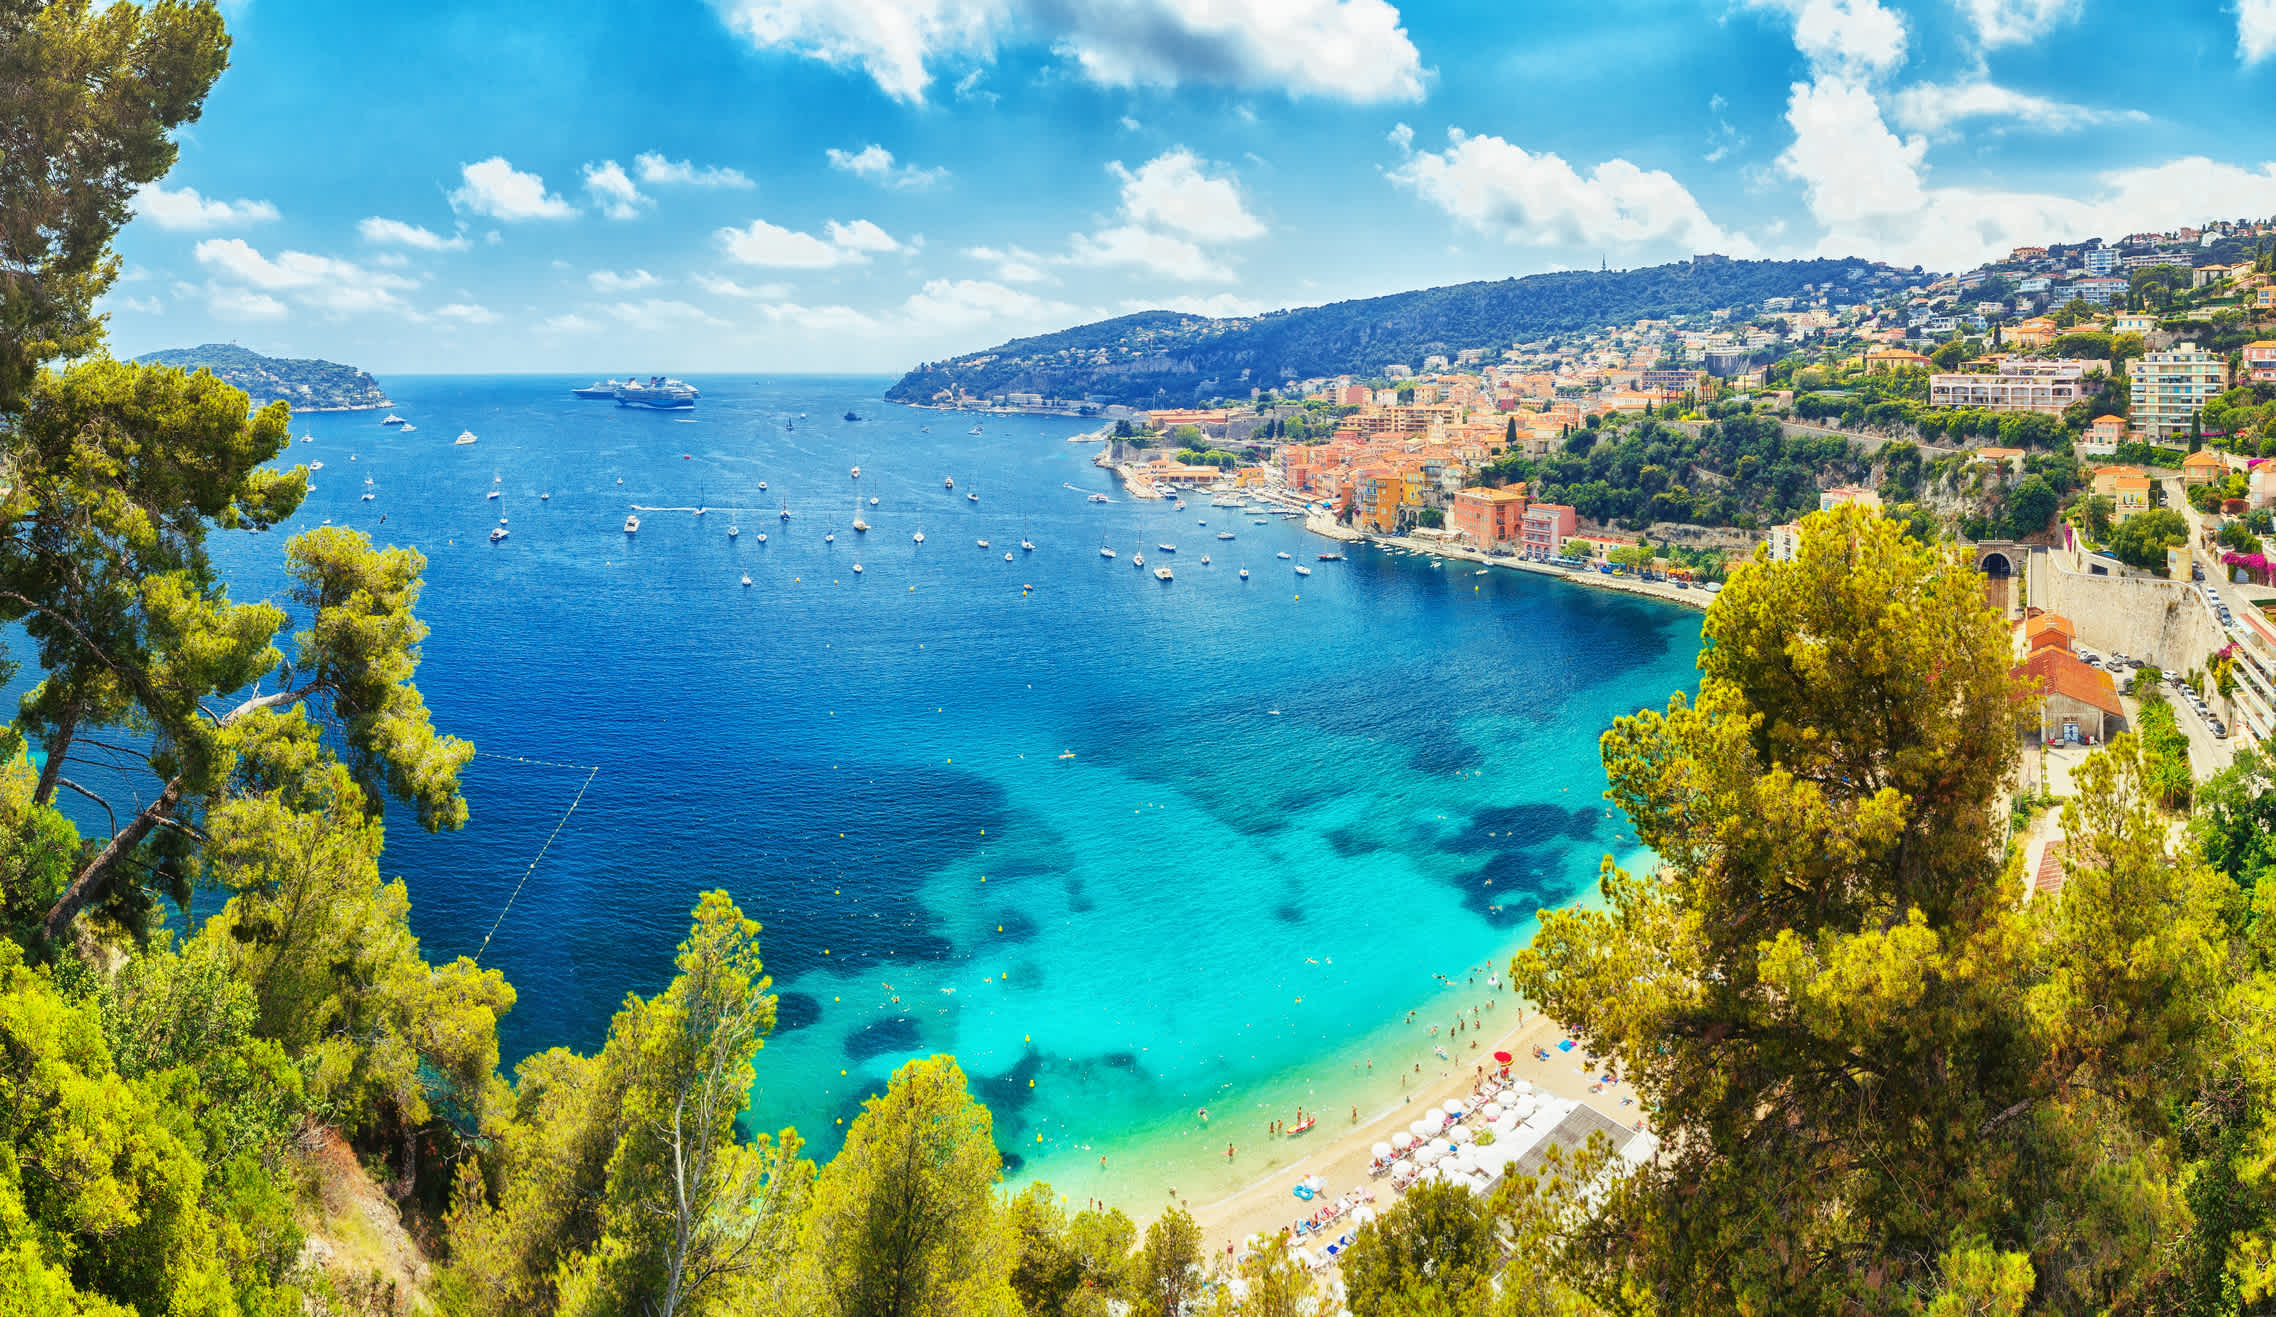 Discover the beautiful turquoise waters of the south of France, pictured here, on a French Riviera tour